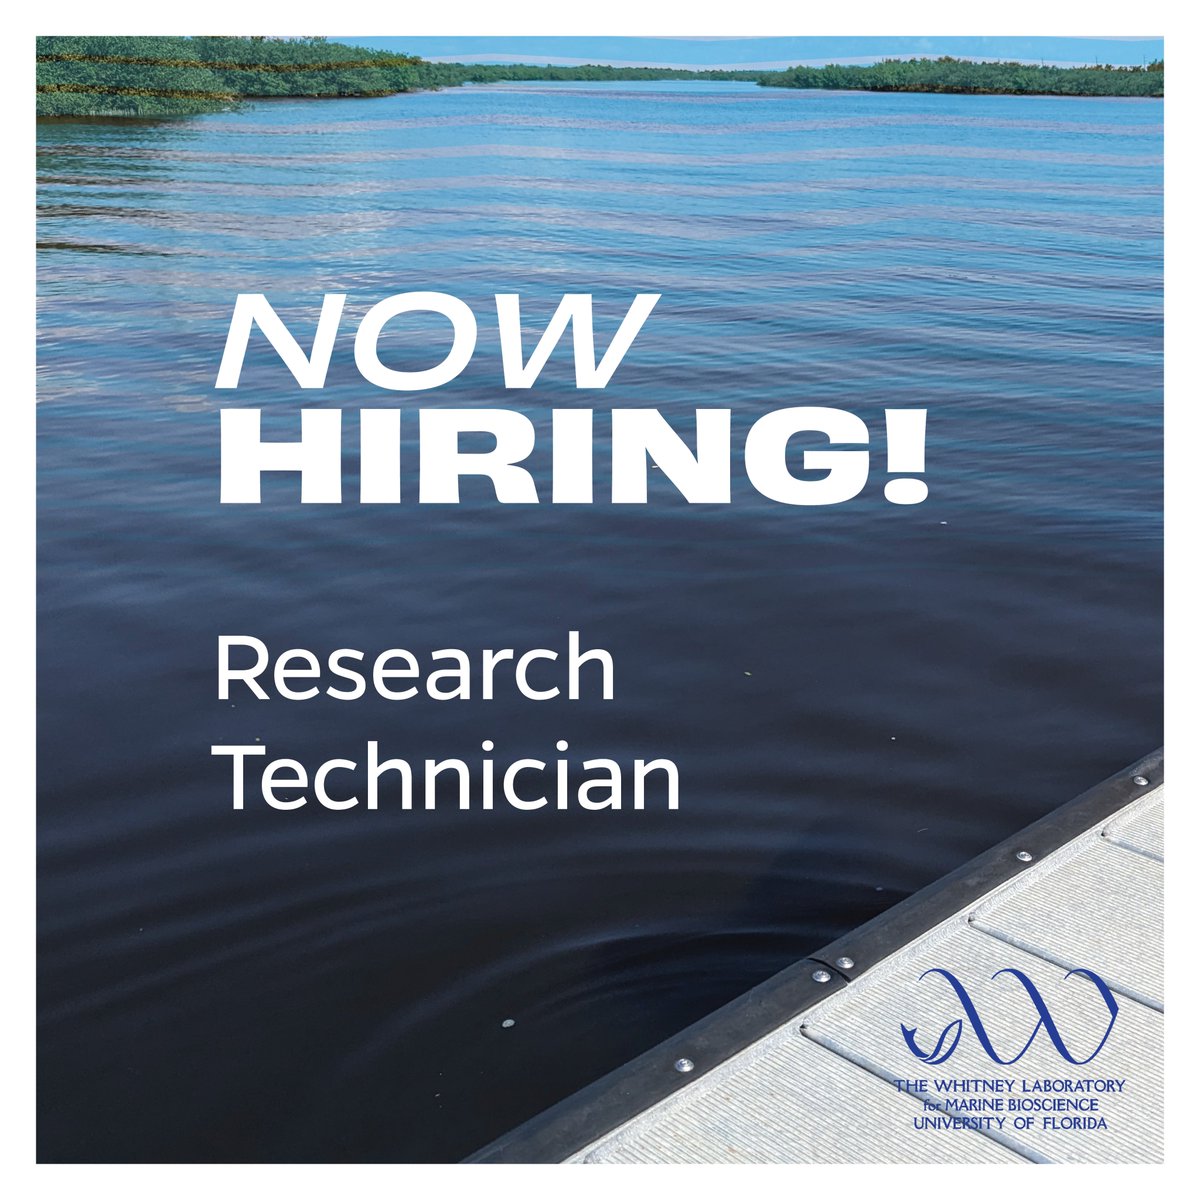 📣 #NowHiring! OPS Research Technician

Join the  NSF-funded, multidisciplinary project “Functional genomic dissection of biomineralization at multiple scales using a new marine model.”

Details/Apply 👉 explore.jobs.ufl.edu/en-us/job/5314…

#JoinOurTeam #UF #WhitneyLaboratory #StAugustine